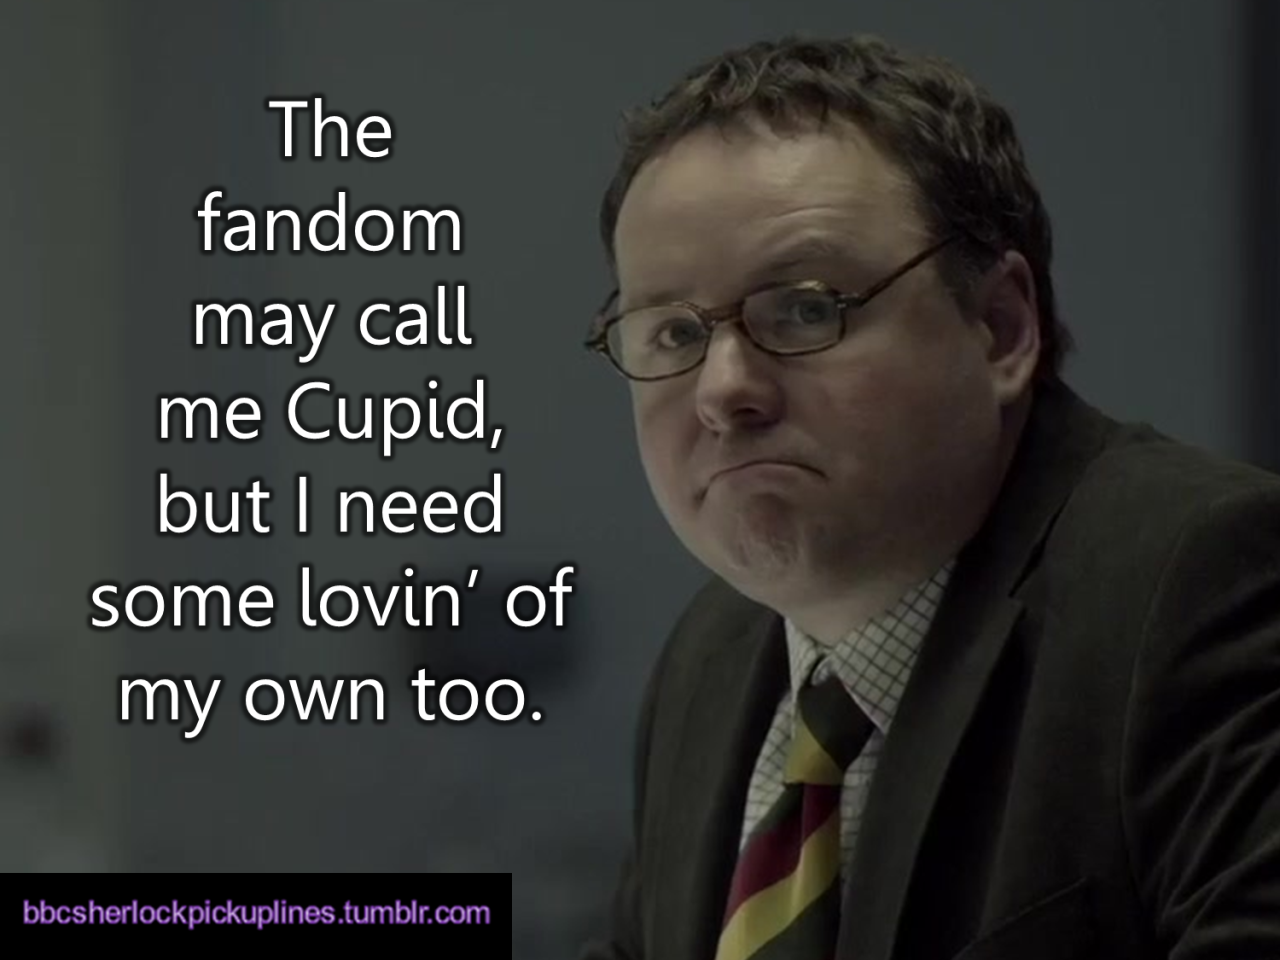 &ldquo;The fandom may call me Cupid, but I need some lovin&rsquo; of my own